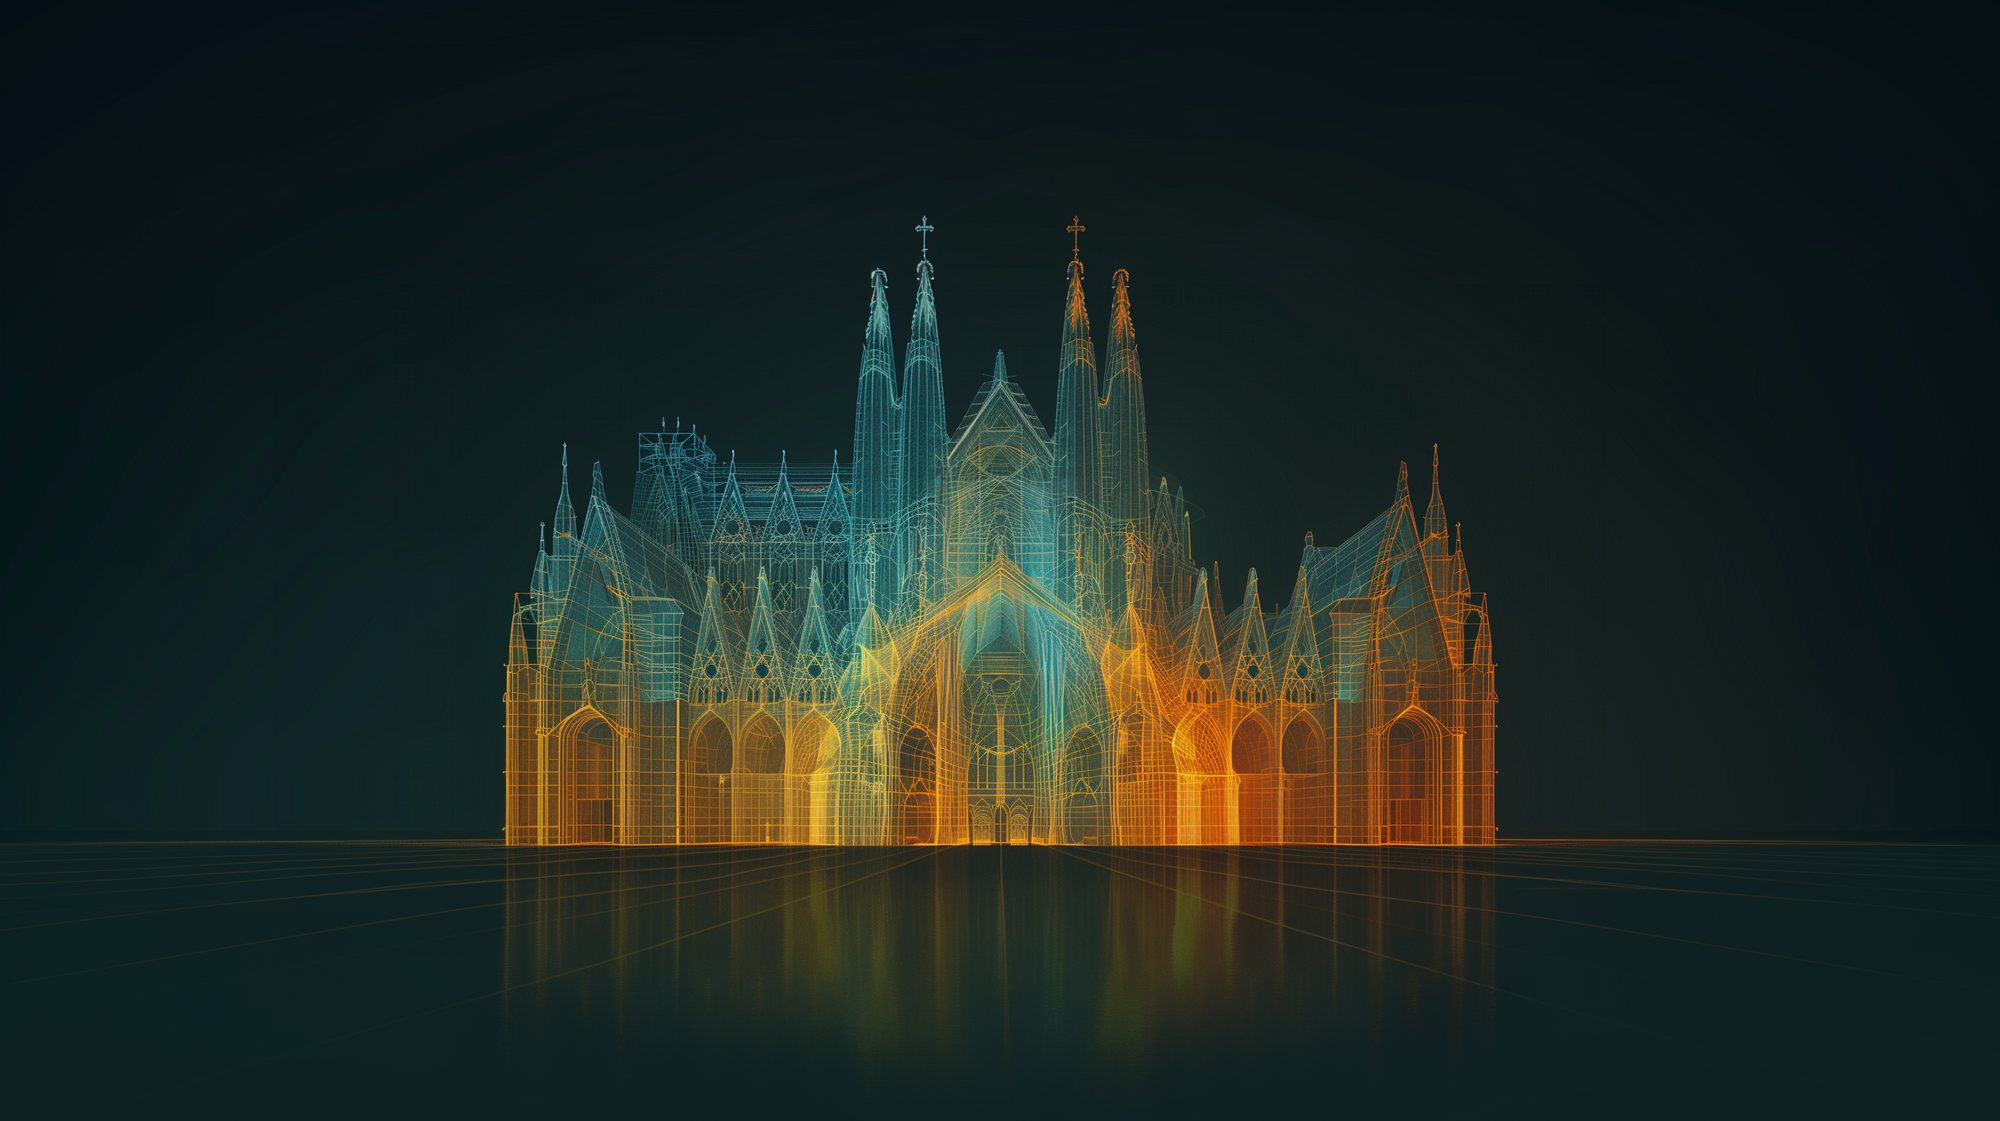 Digital wireframe rendering of a Gothic-style cathedral, with colorful outlines and pointed spires on a dark background.